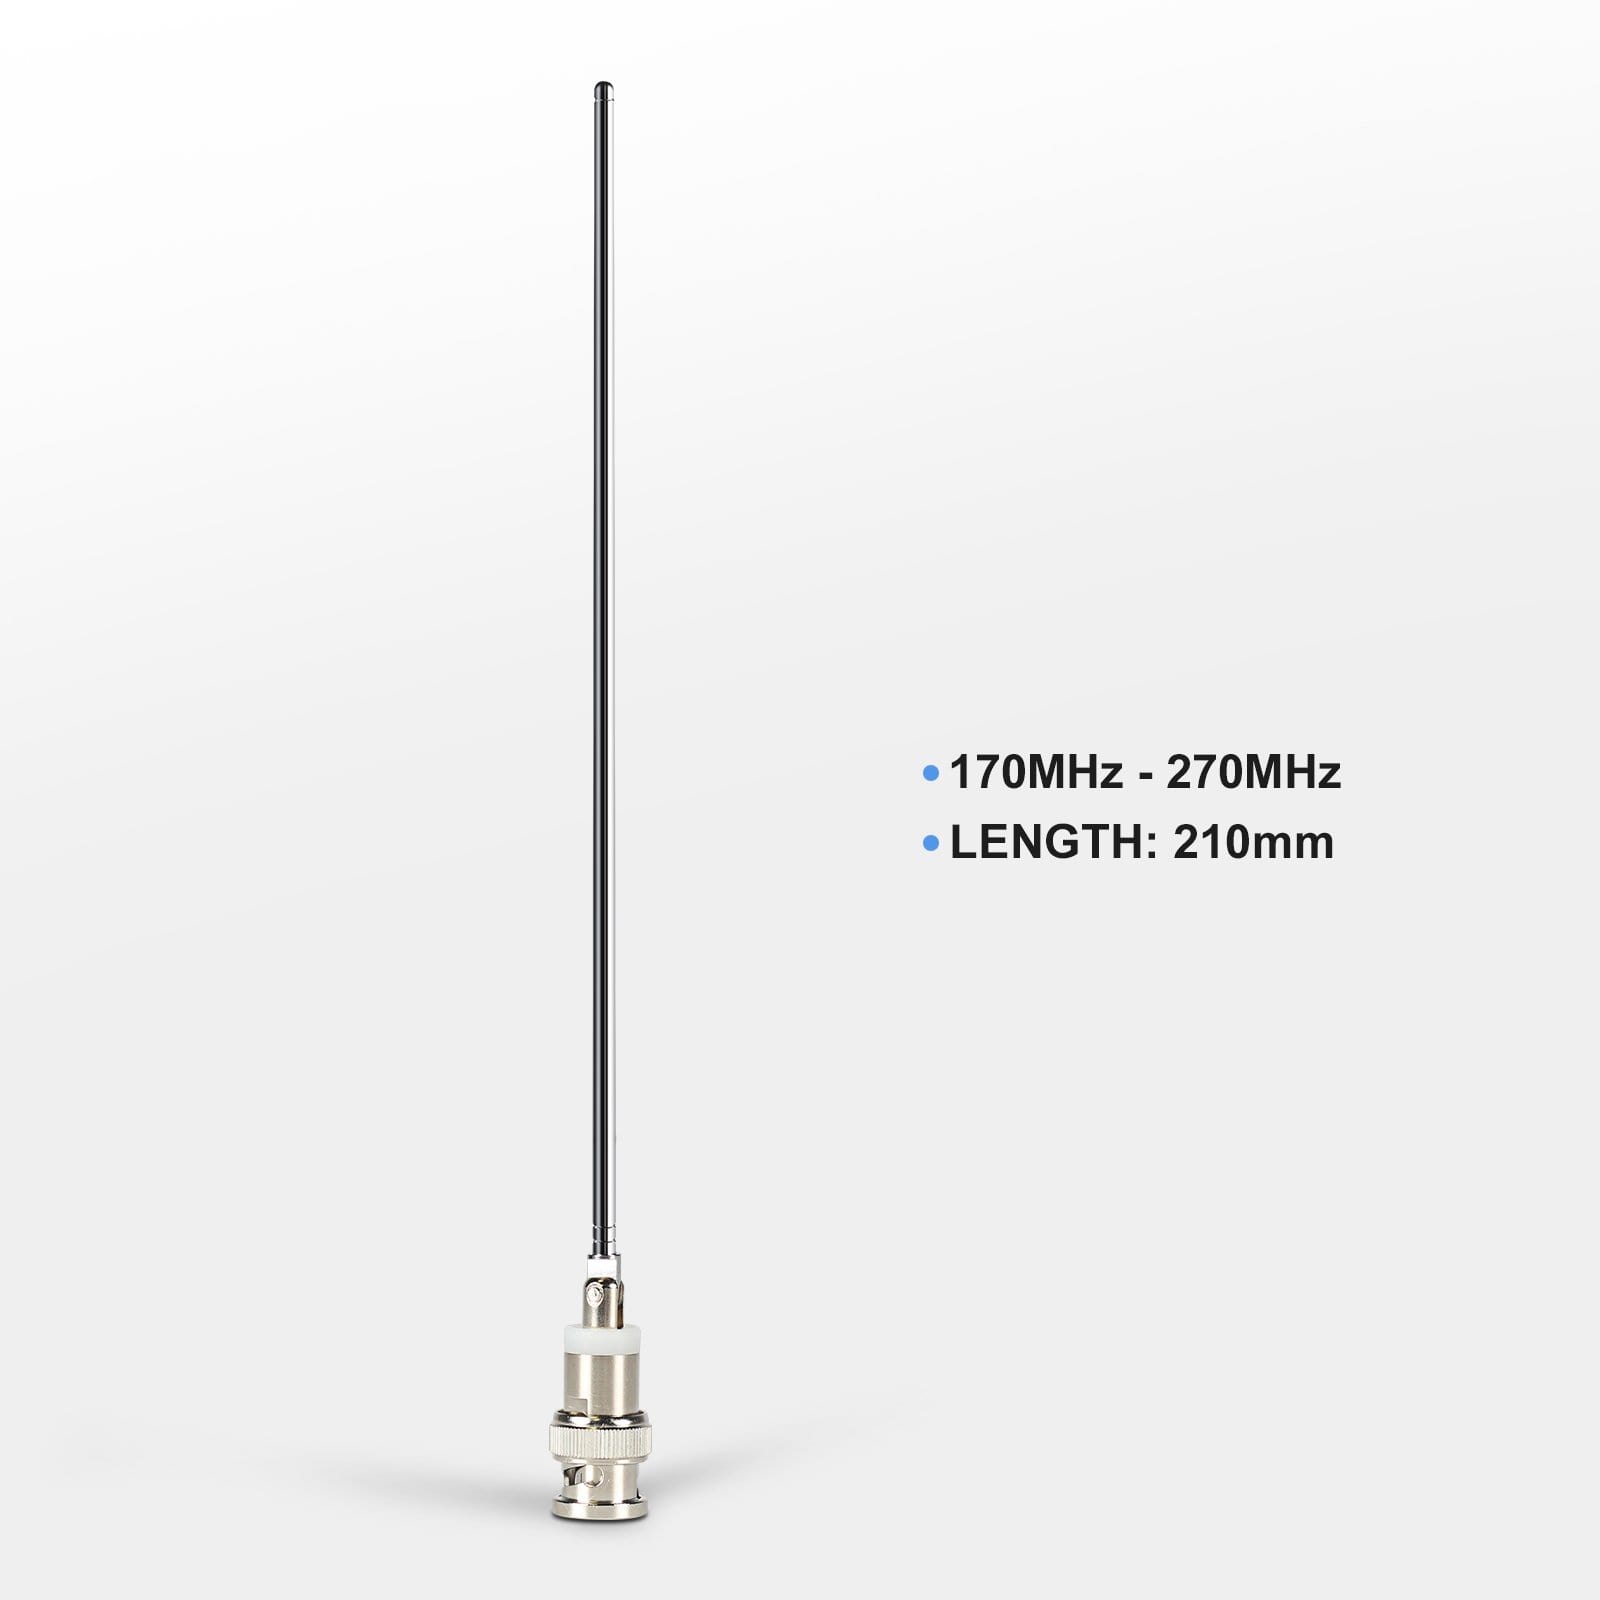 Phenyx Pro BNC Antenna for Wireless Receiver, VHF 170MHz - 270MHz (Pack of 2)